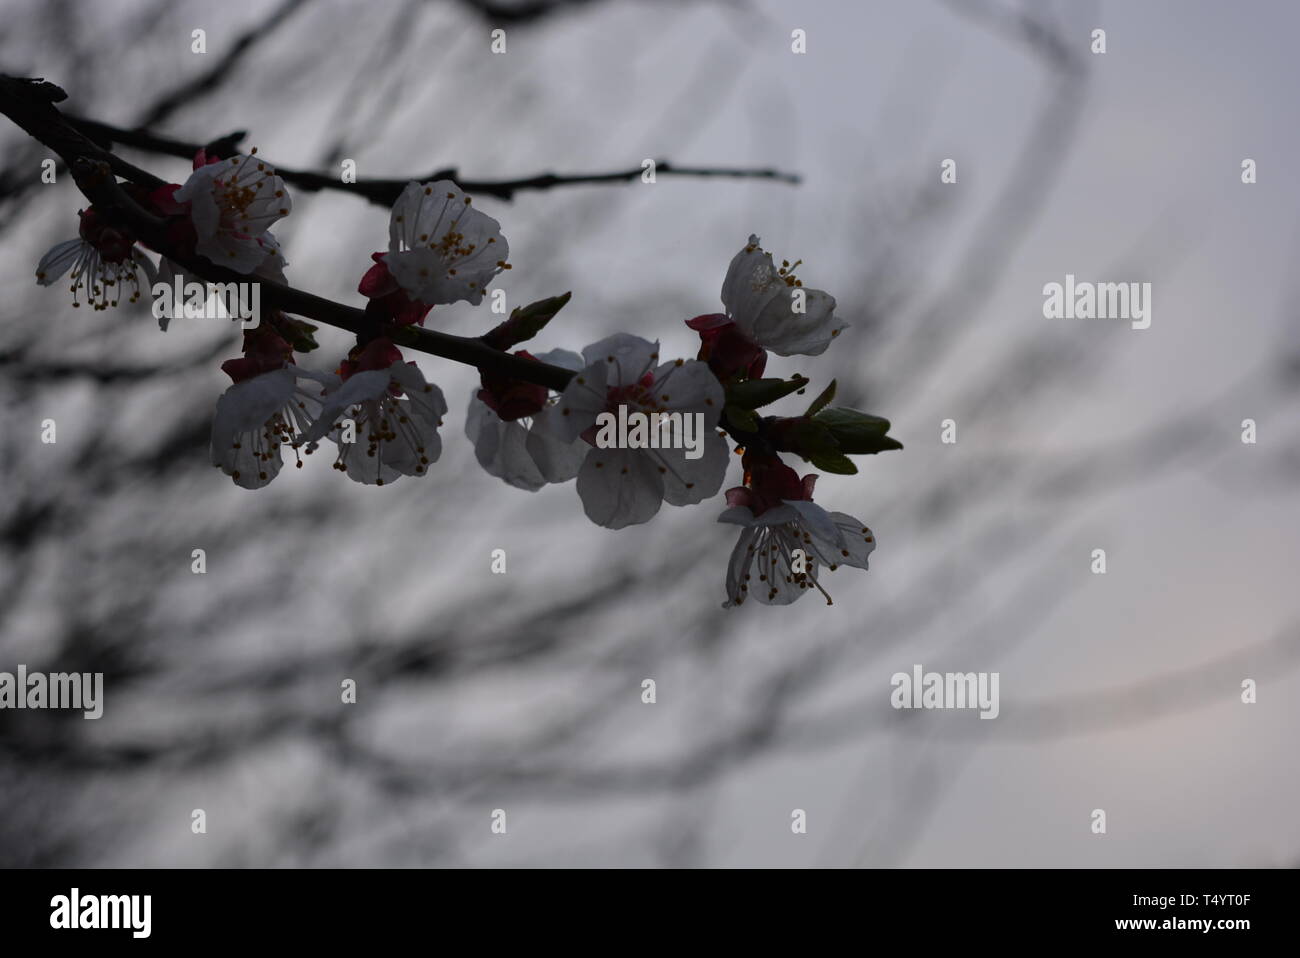 Spring young tree with beautiful inflorescences, apricot flowering period. Beautiful whiter apricot flowers. Stock Photo